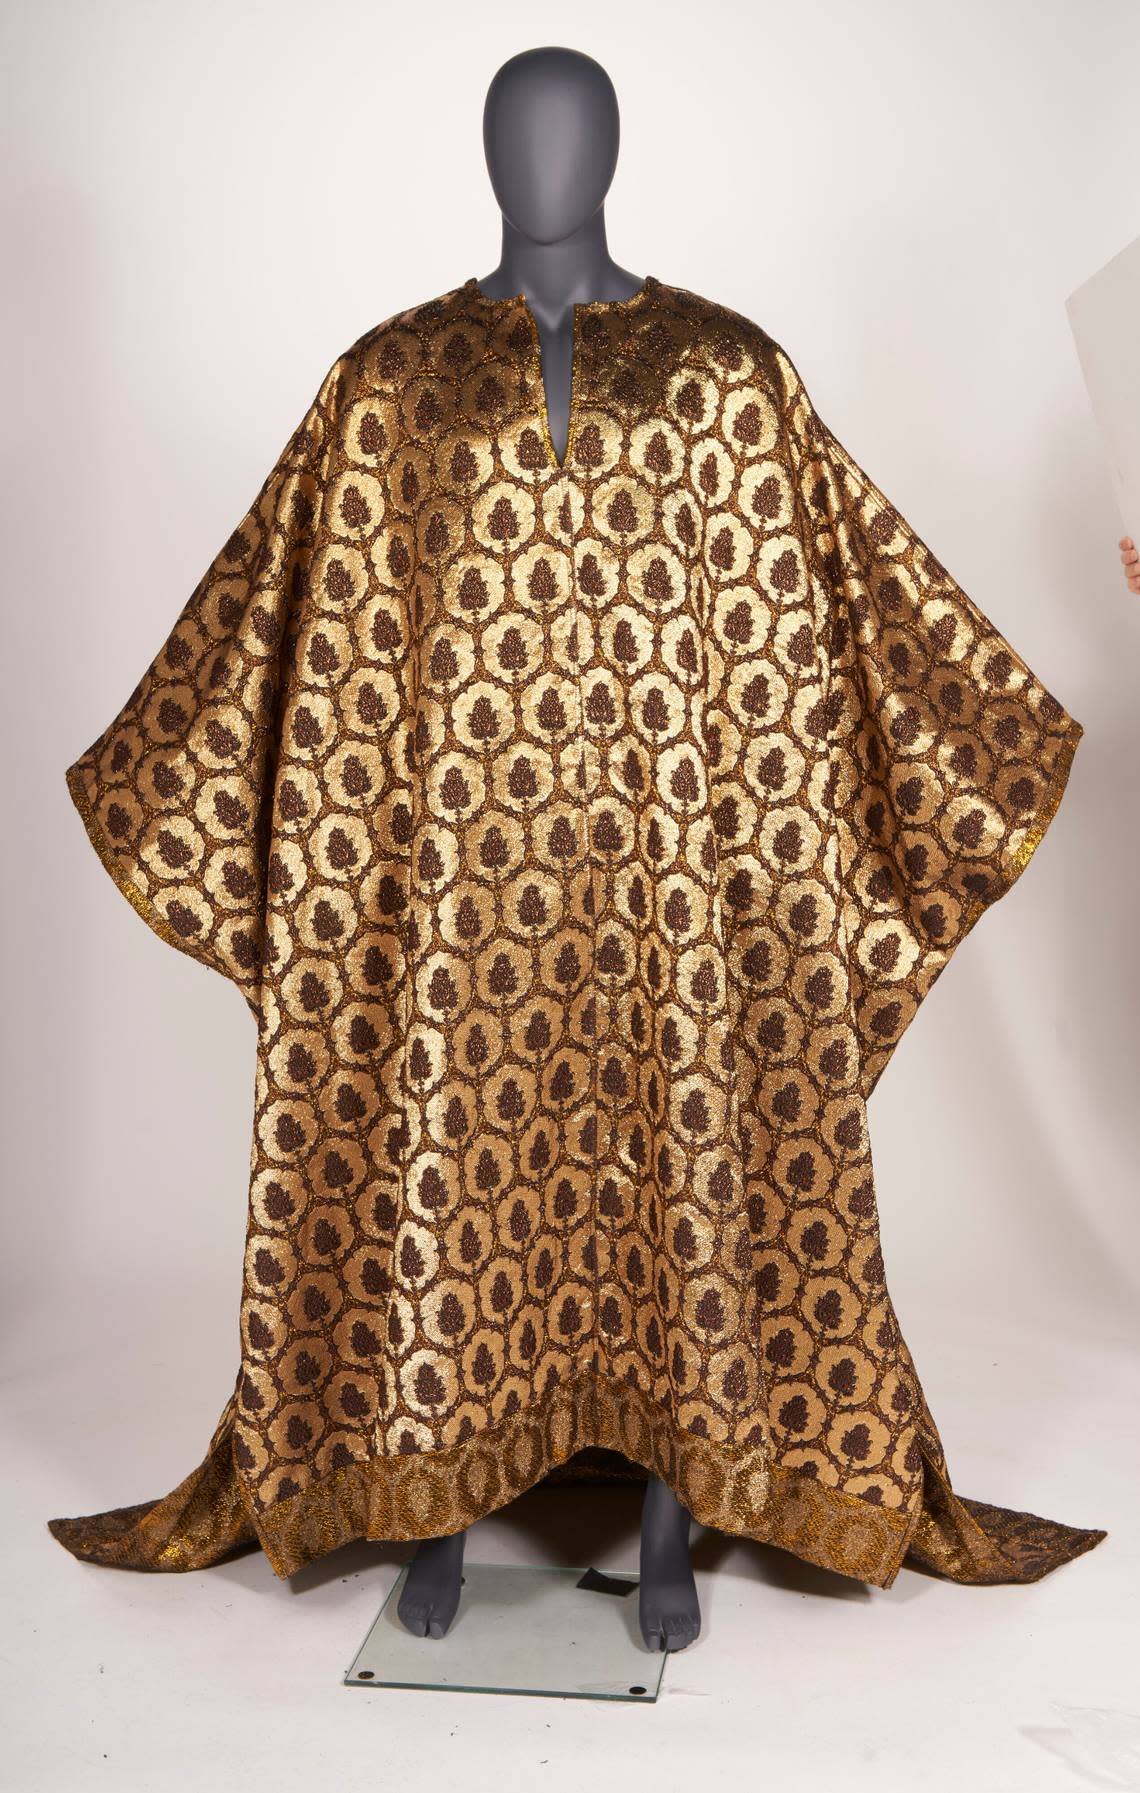 A gold caftan that was owned by André Leon Talley that will be sold in an auction. Made by Dapper Dan, circa 2007, Talley wore it to a Carolina Herrera New York Fashion Week show.